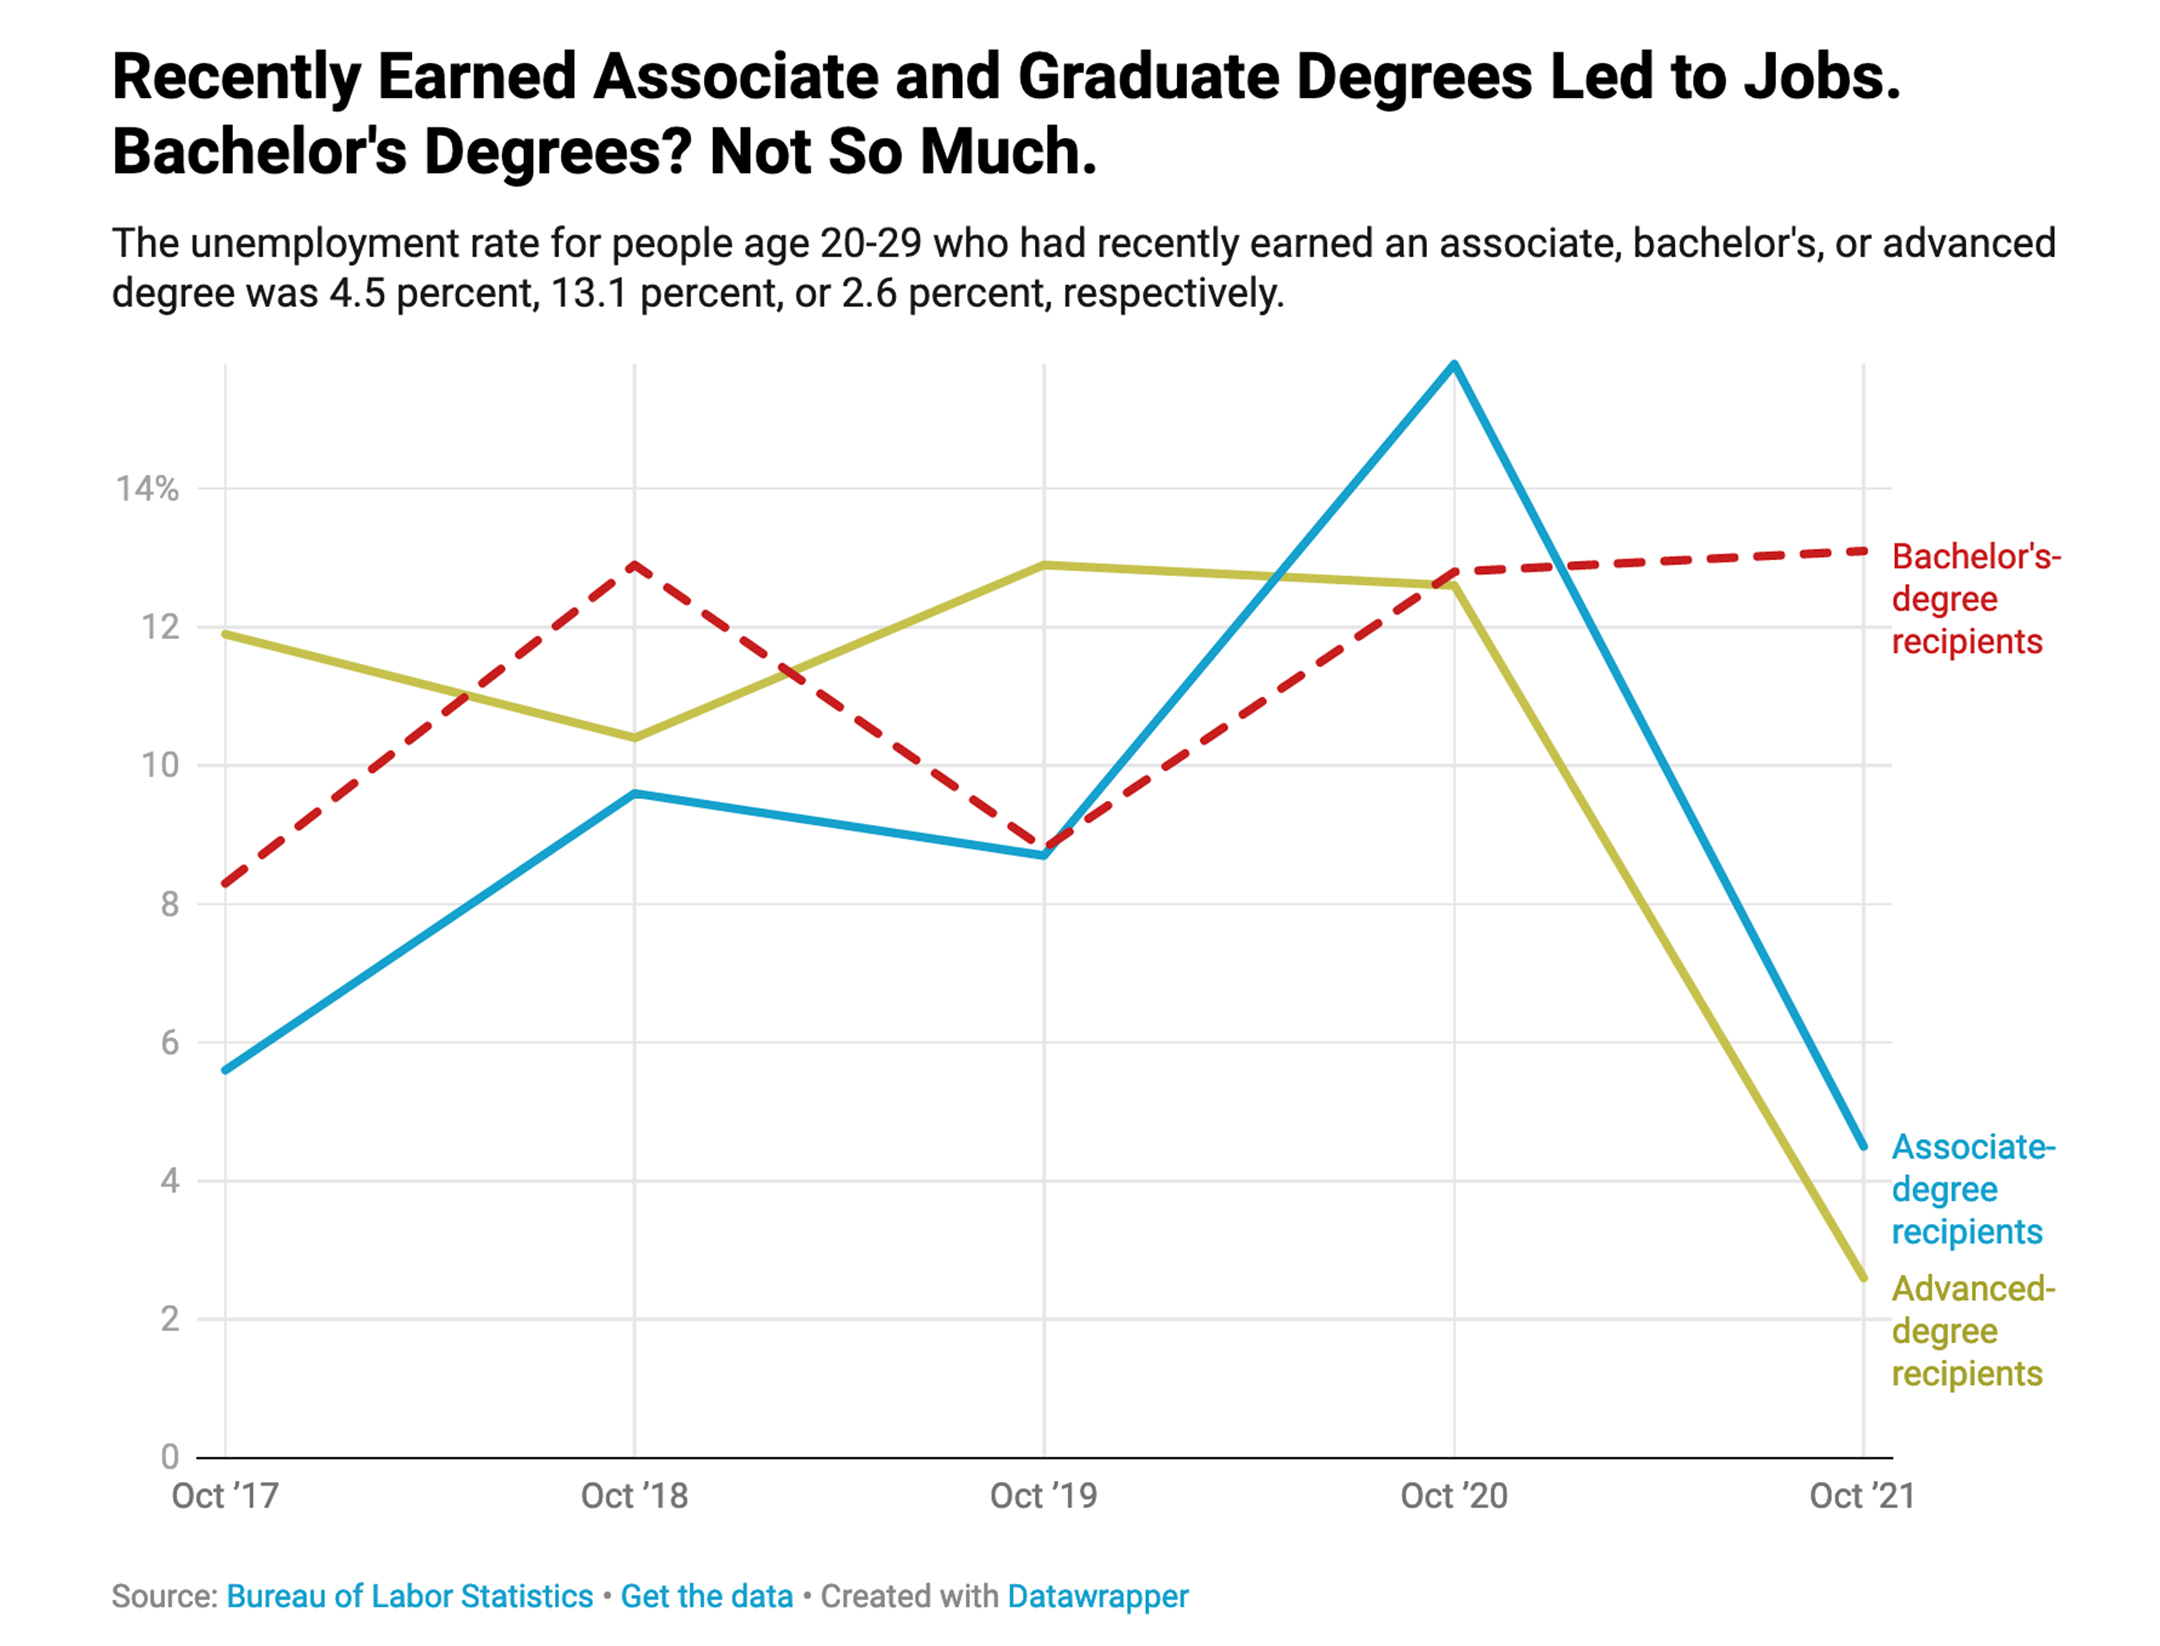 Line chart titled "Recently Earned Associate and Graduate Degrees Led to Jobs. Bachelor's Degree? Not So Much." With three lines, in yellow (advanced degrees), blue (associate degrees), and dashed red (bachelor's degrees) graphing data from Oct 17 to Oct 21